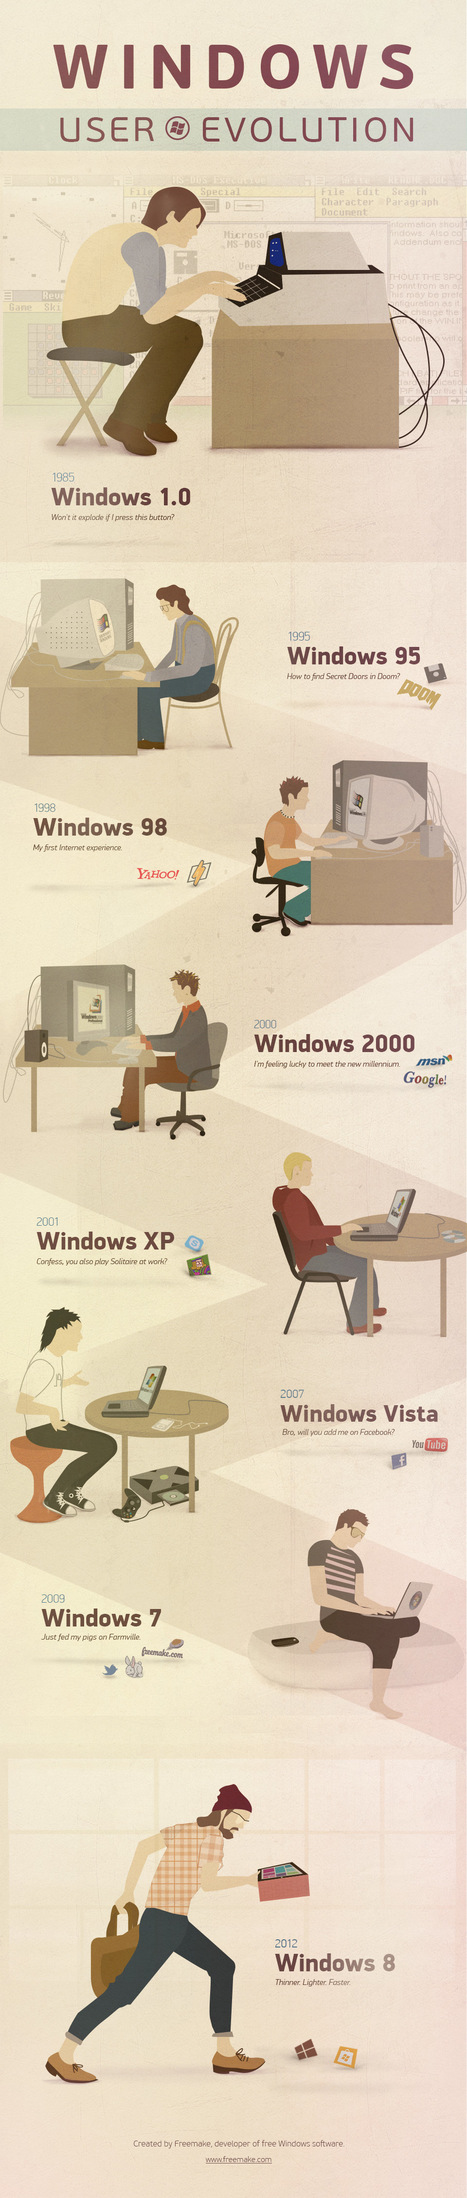 The Evolution of Windows OS From Beginning to Present [INFOGRAPHIC] | Pedalogica: educación y TIC | Scoop.it